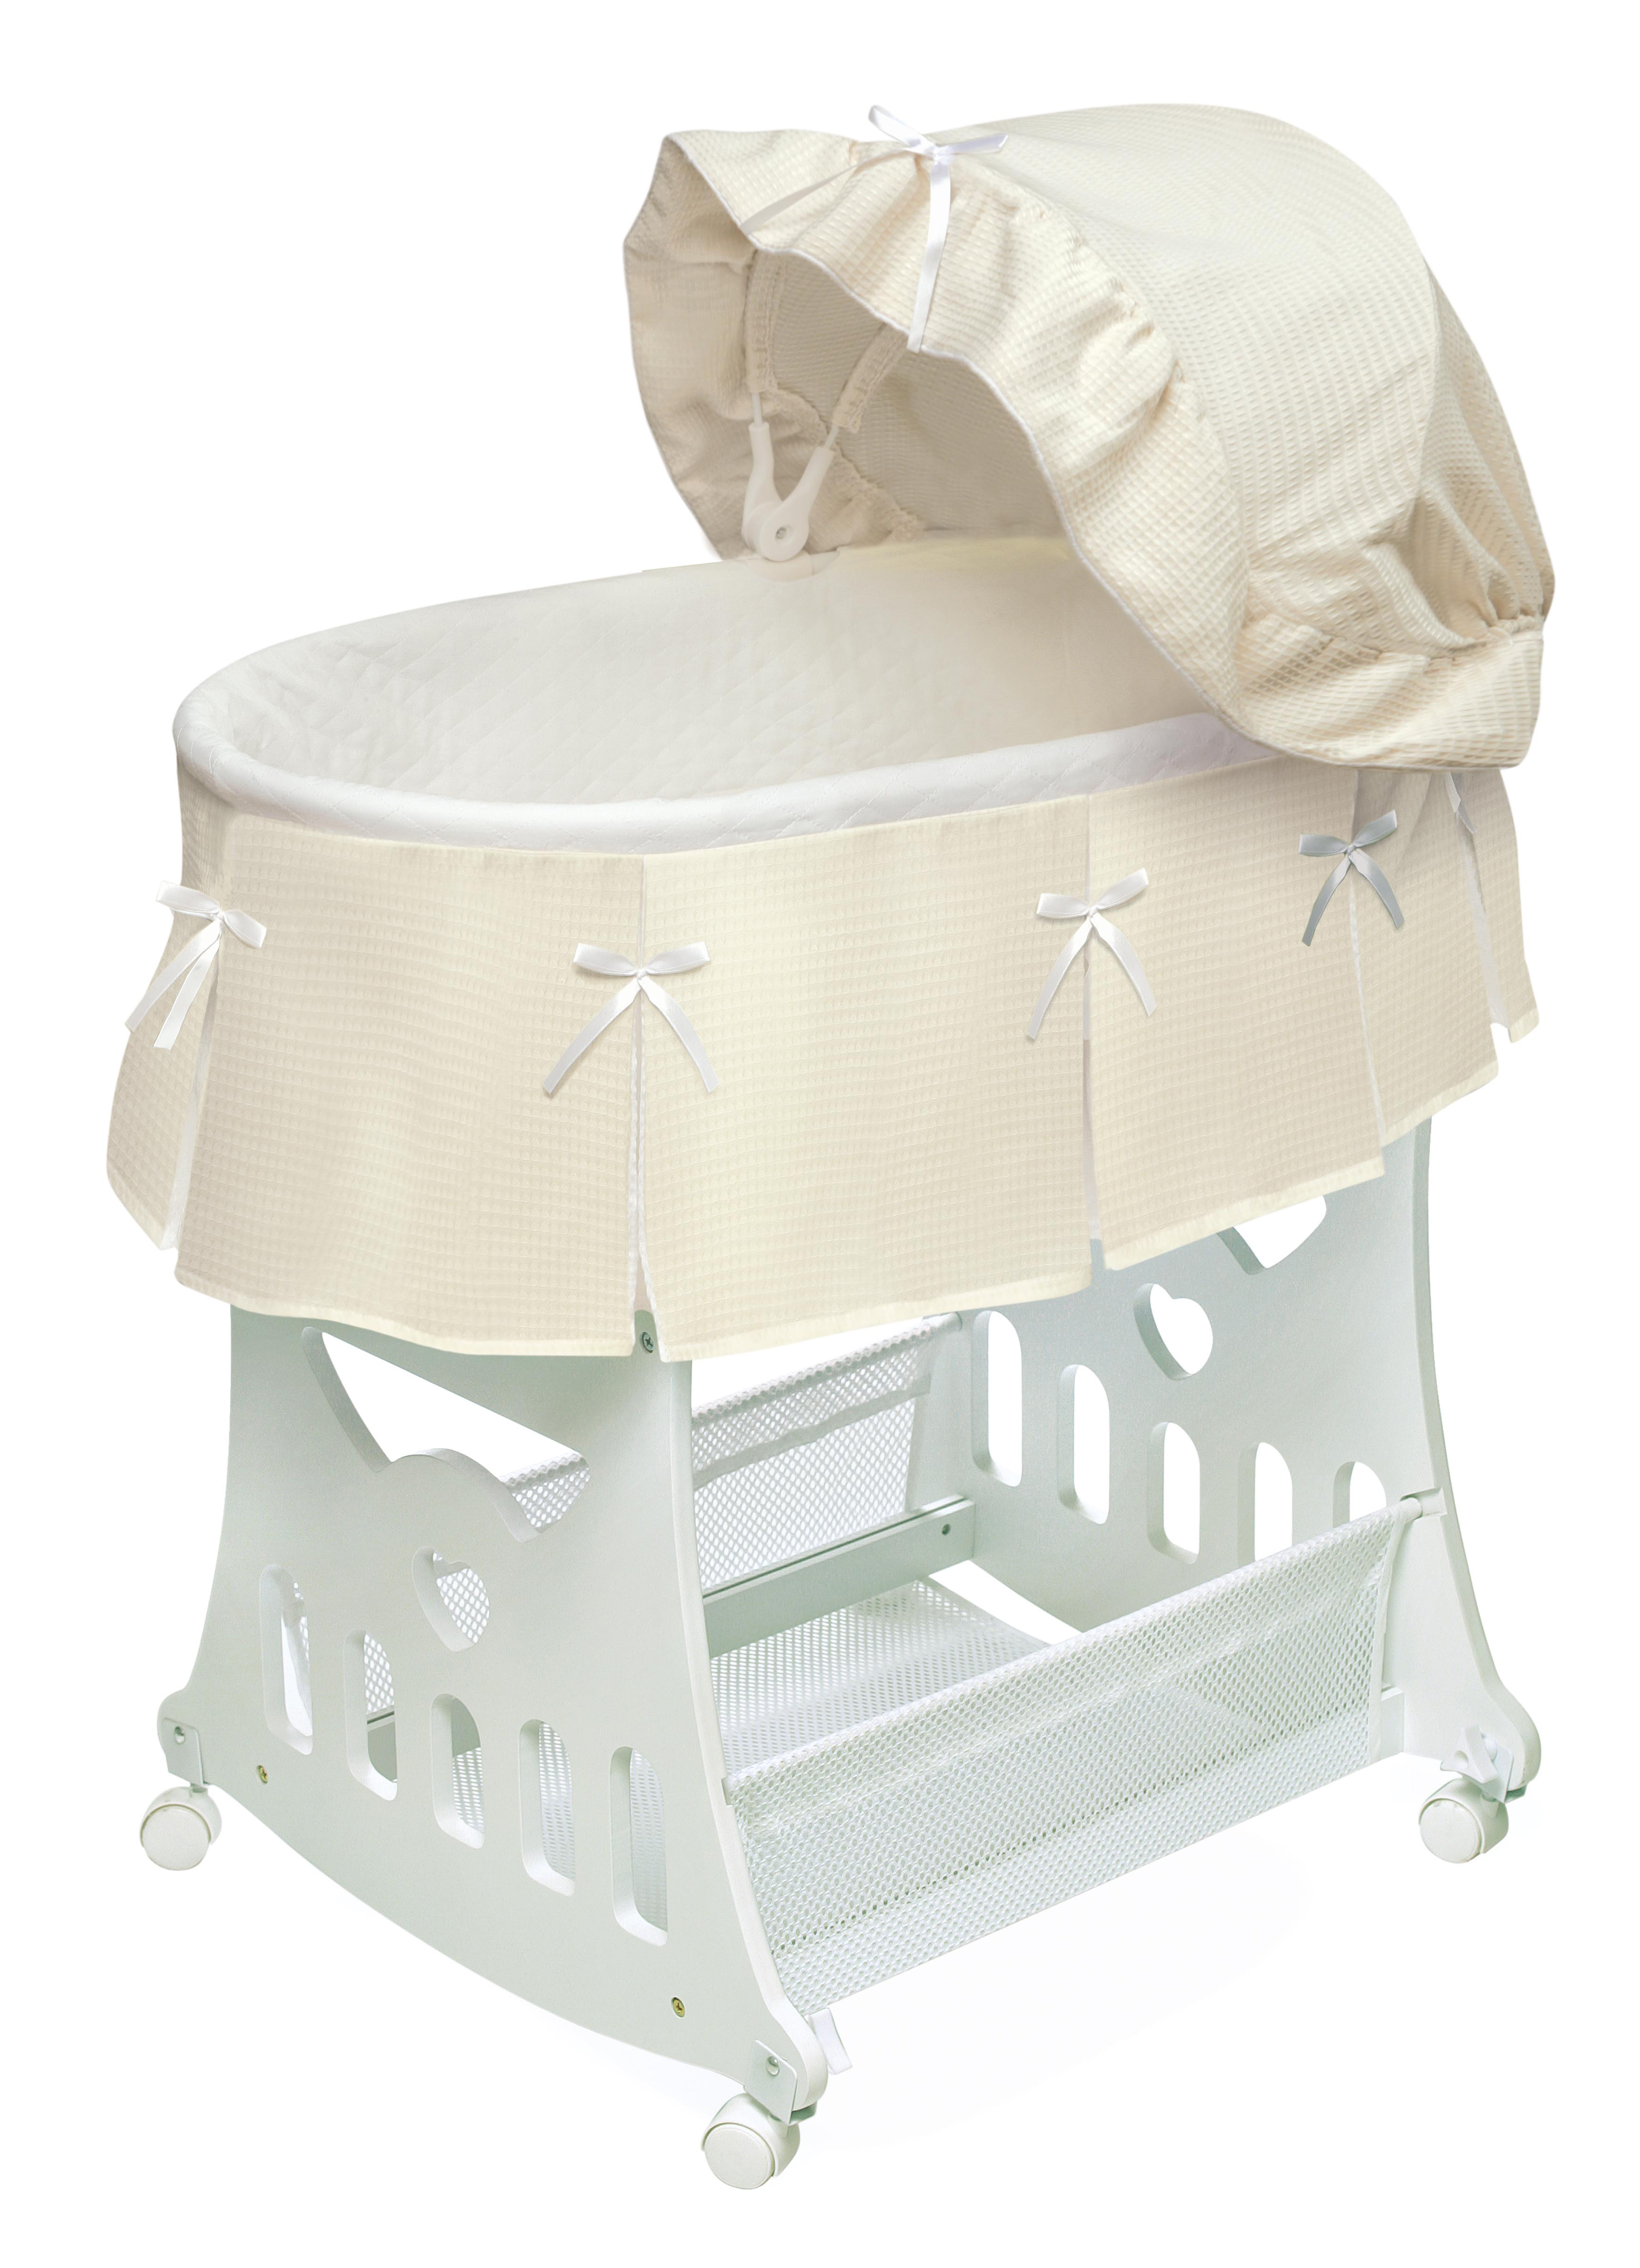 Portable Bassinet n Cradle with Toybox Base and Half Skirt - Ecru